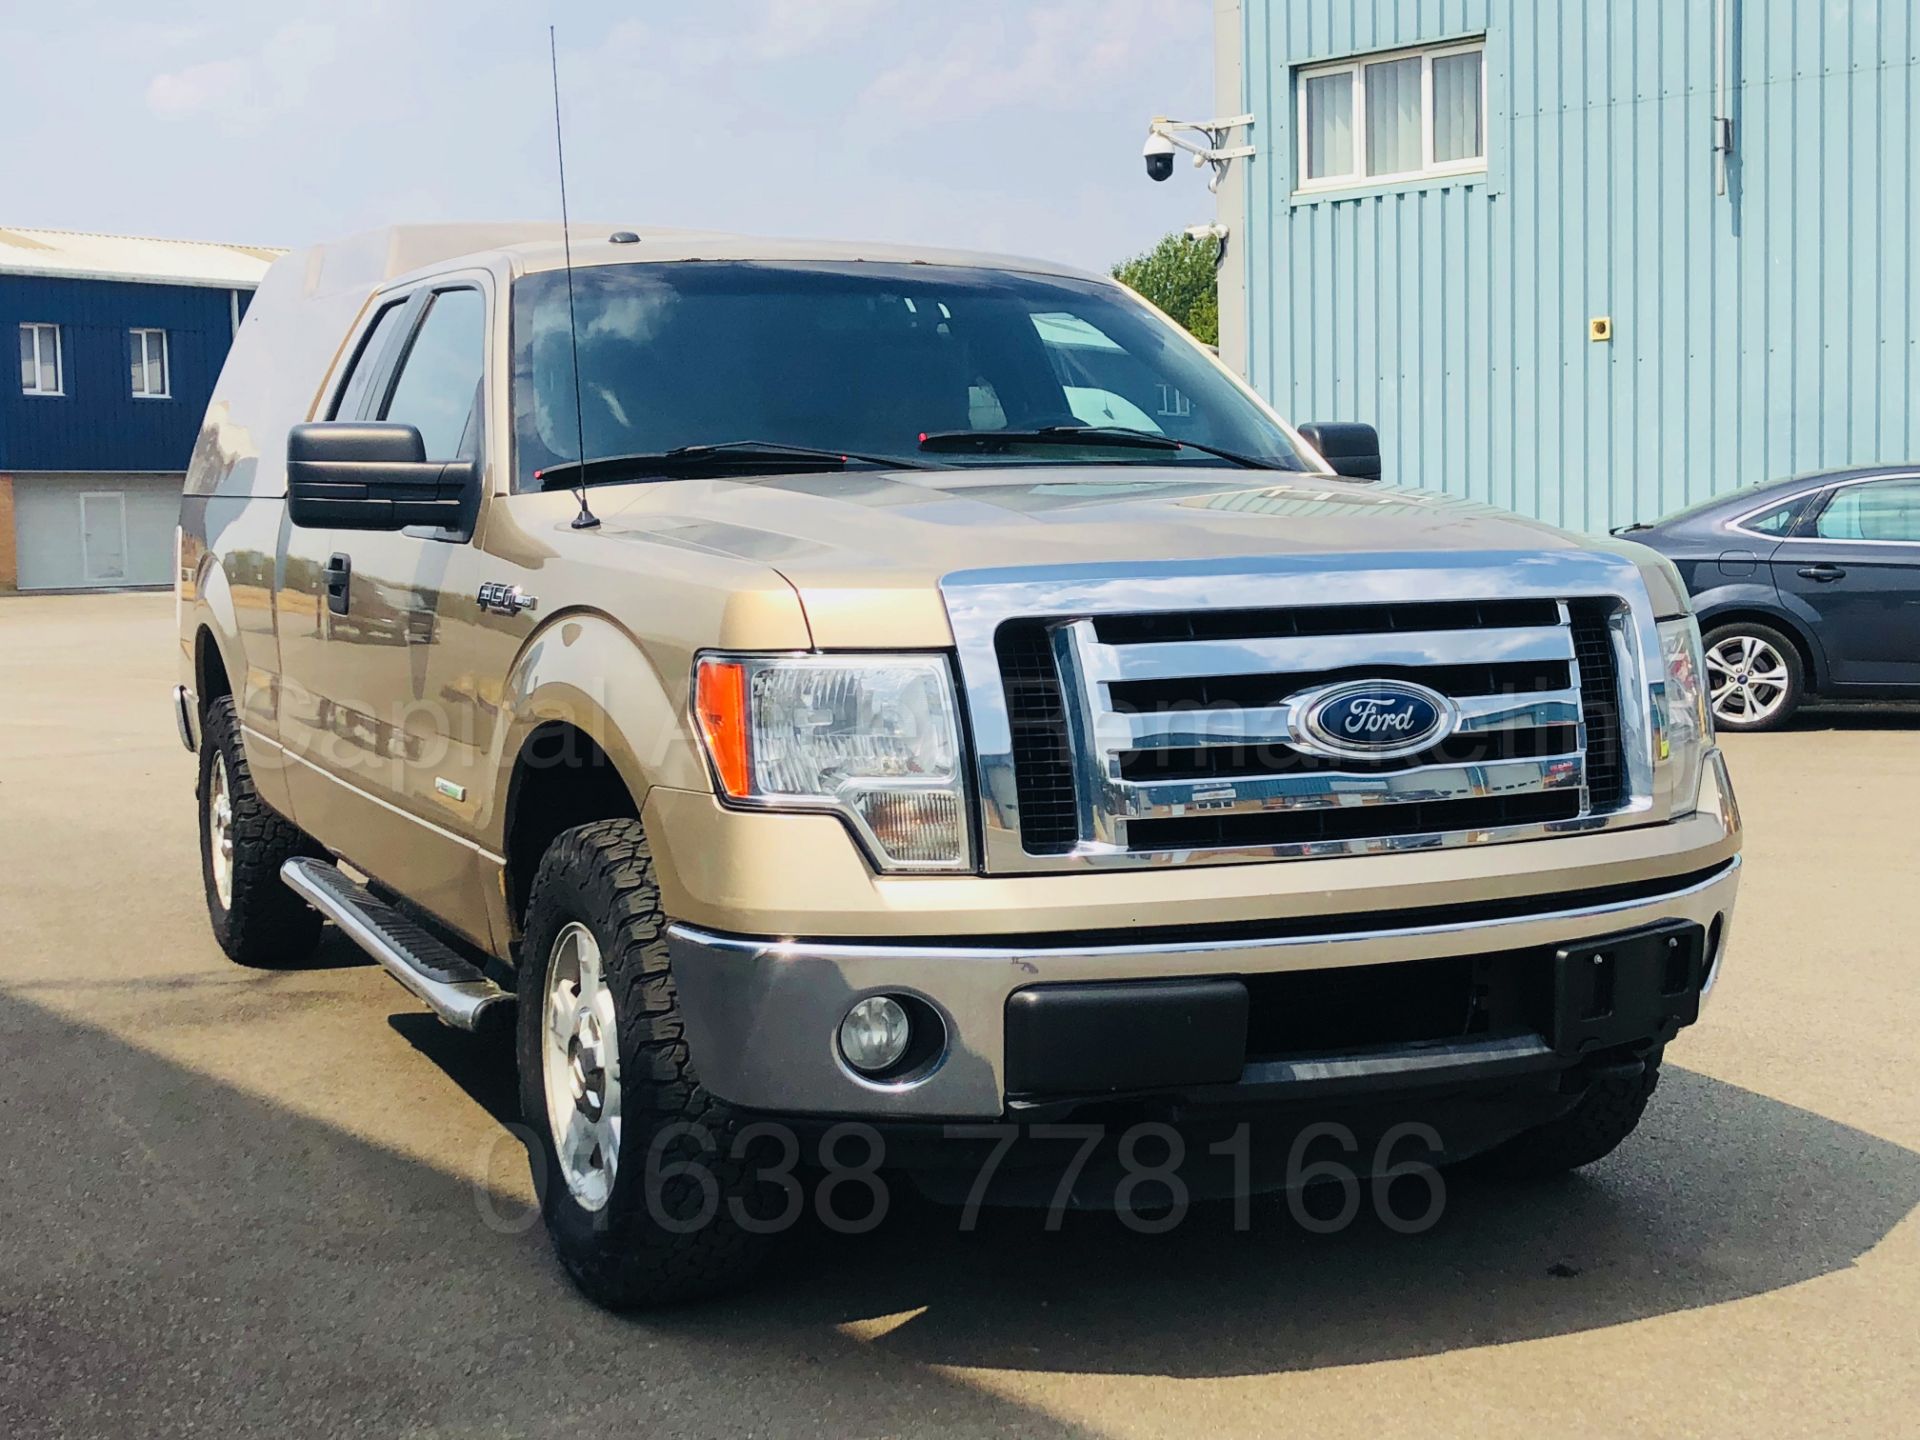 (On Sale) FORD F-150 5.4 V8 XLT EDITION KING-CAB (2012) MODEL**4X4**6 SEATER**AUTOMATIC *TOP SPEC* - Image 7 of 52